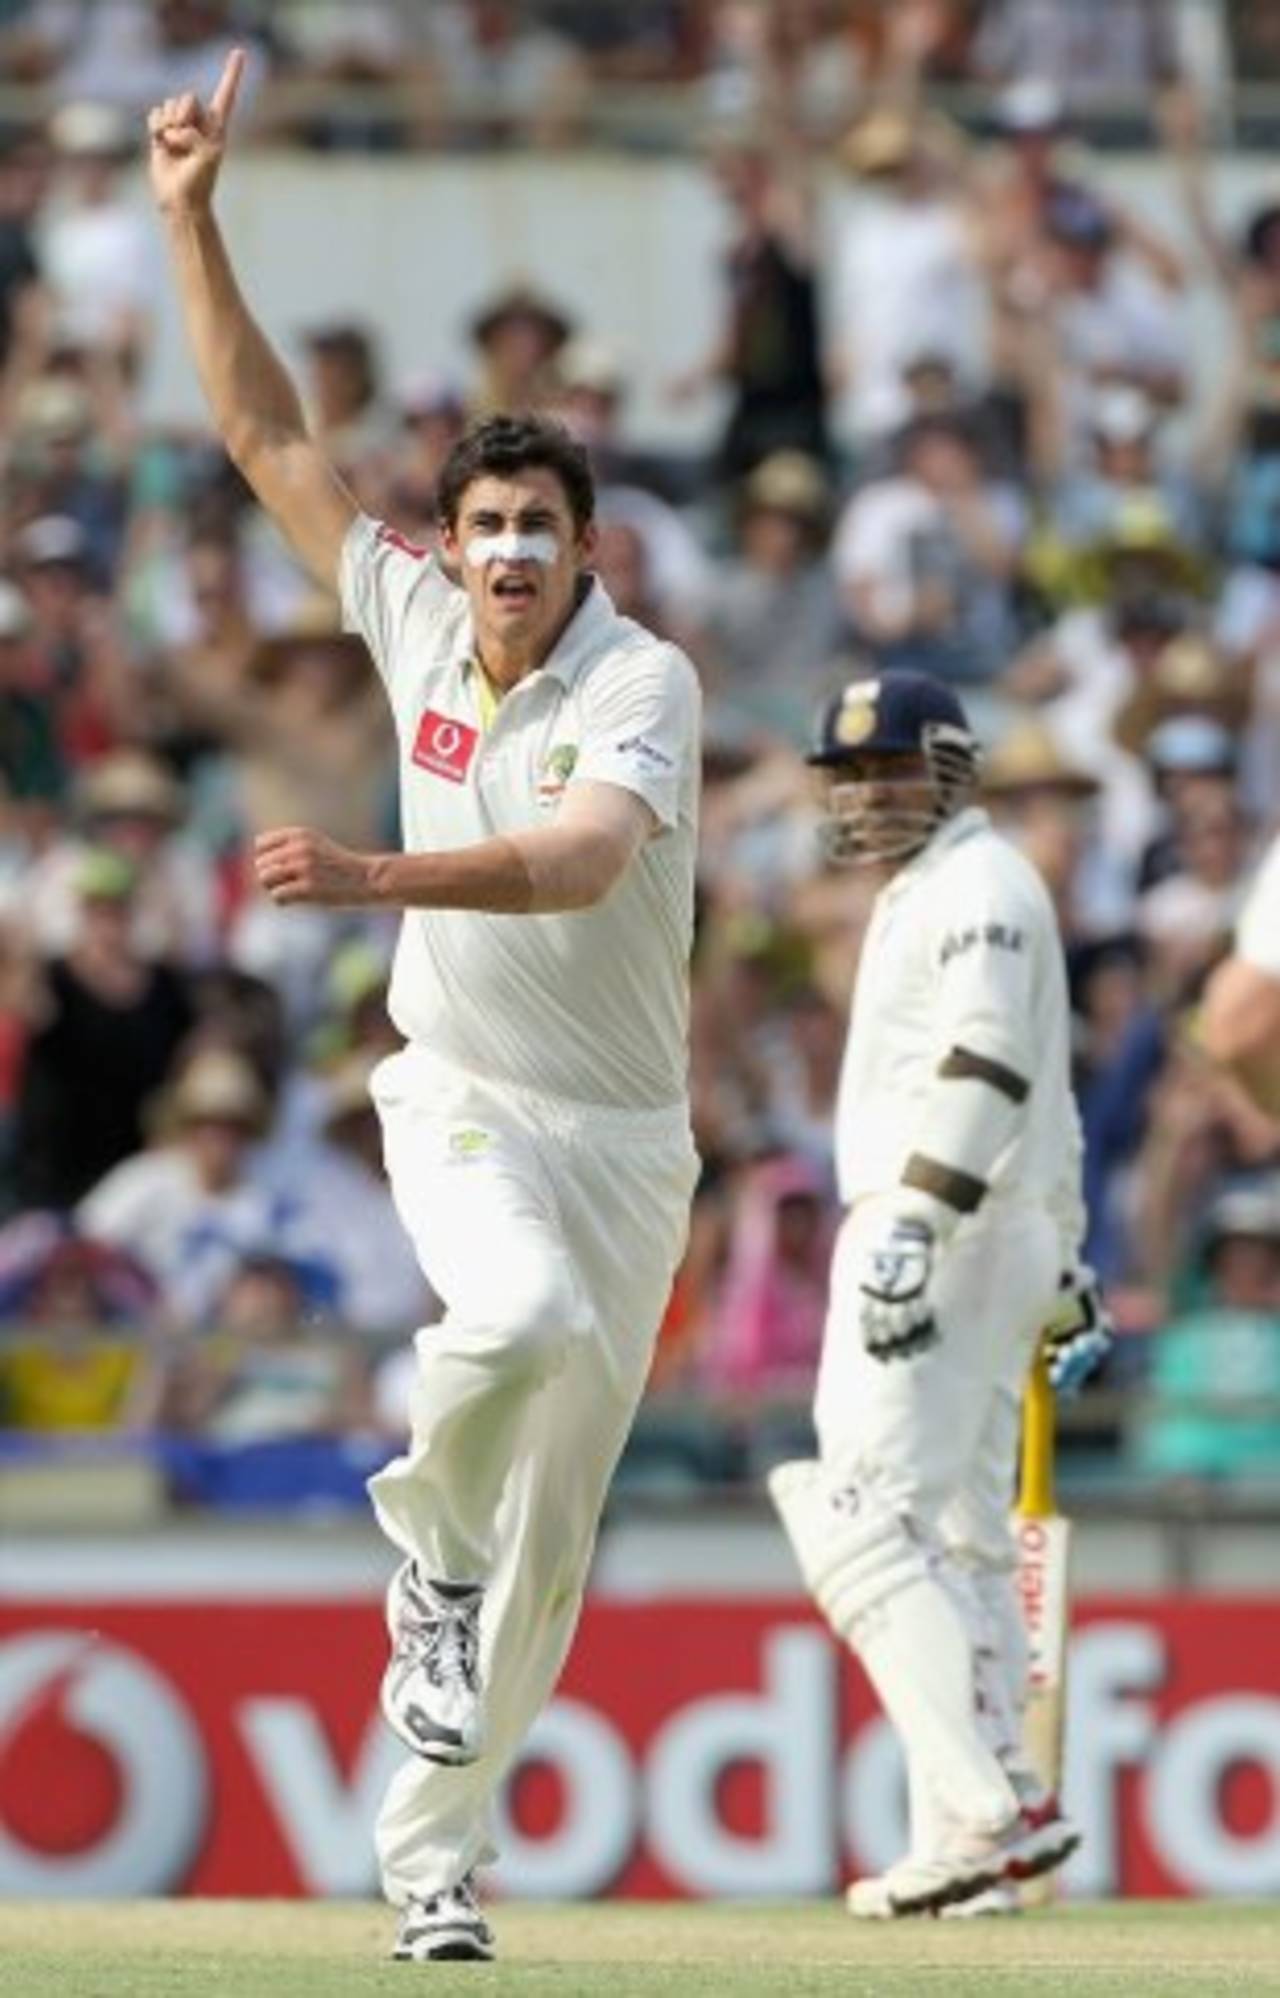 Mitchell Starc: "I've been working on my wrist position for a while now, so it's starting to pay off."&nbsp;&nbsp;&bull;&nbsp;&nbsp;Getty Images